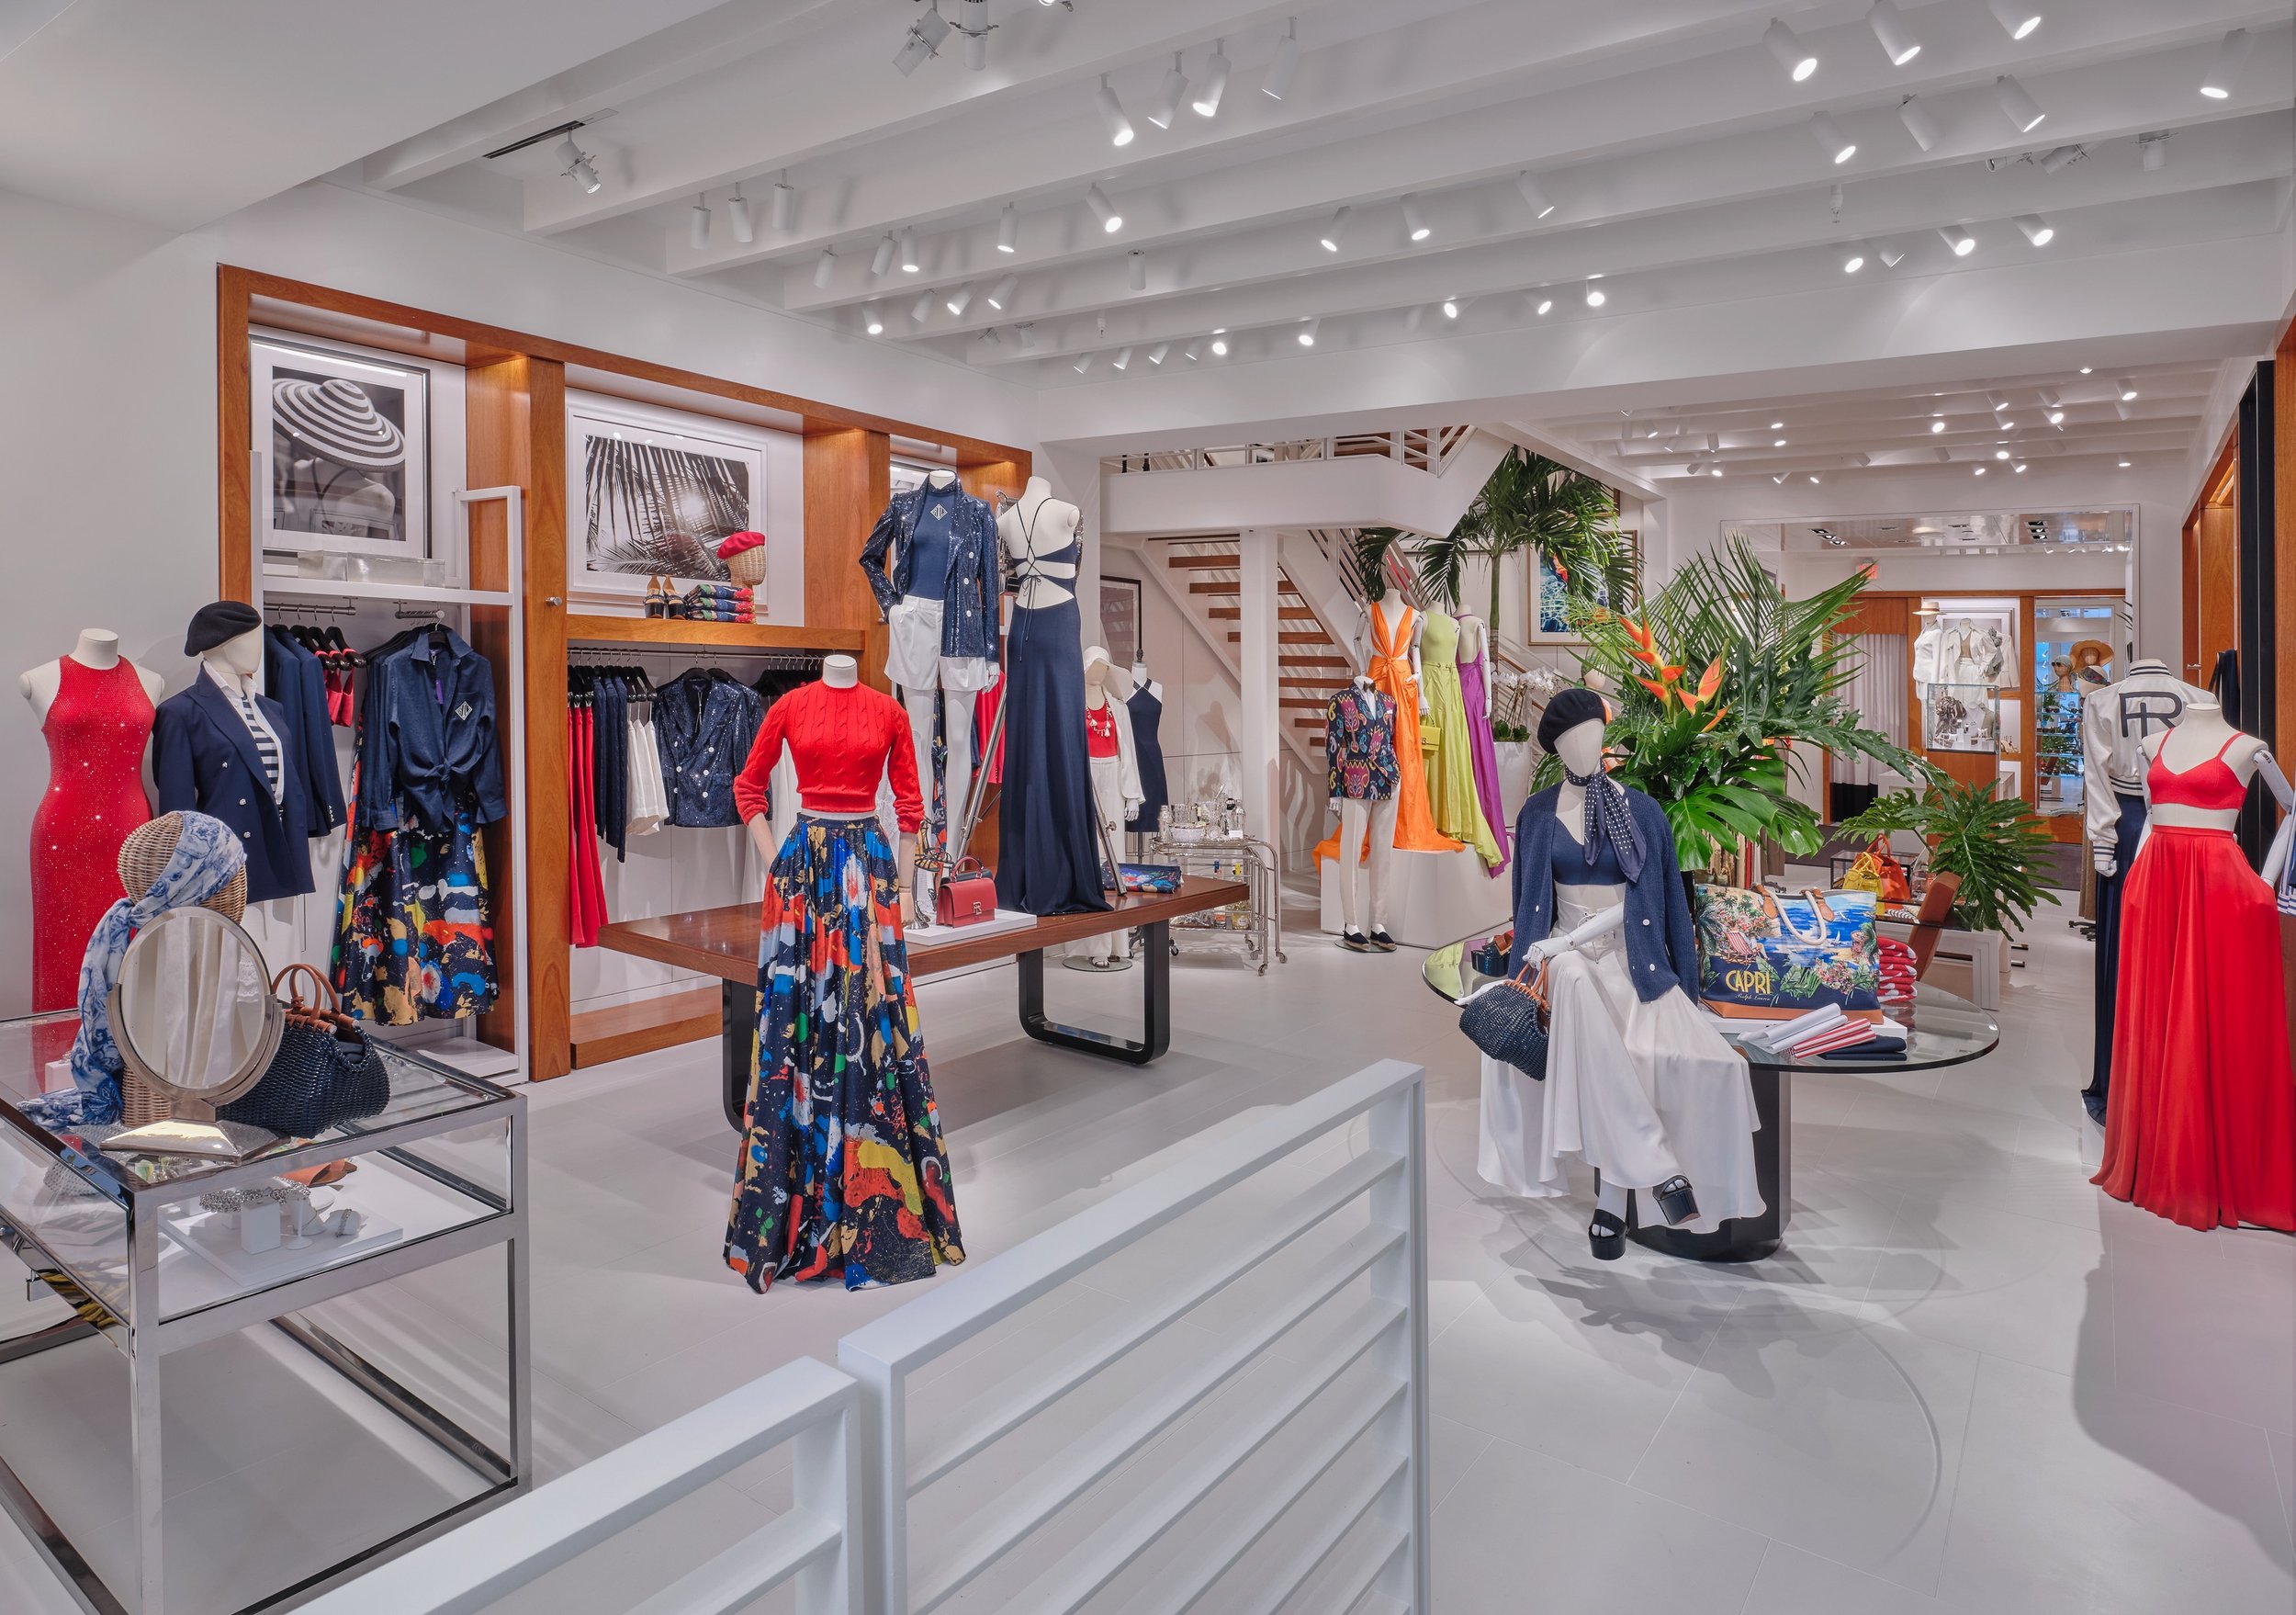 Ralph Lauren on X: Welcome to #RLMiami. Artful and sophisticated, # RalphLauren's luxury concept store captures the dream of Miami. This week,  we're excited to celebrate the store opening and expressions of Miami